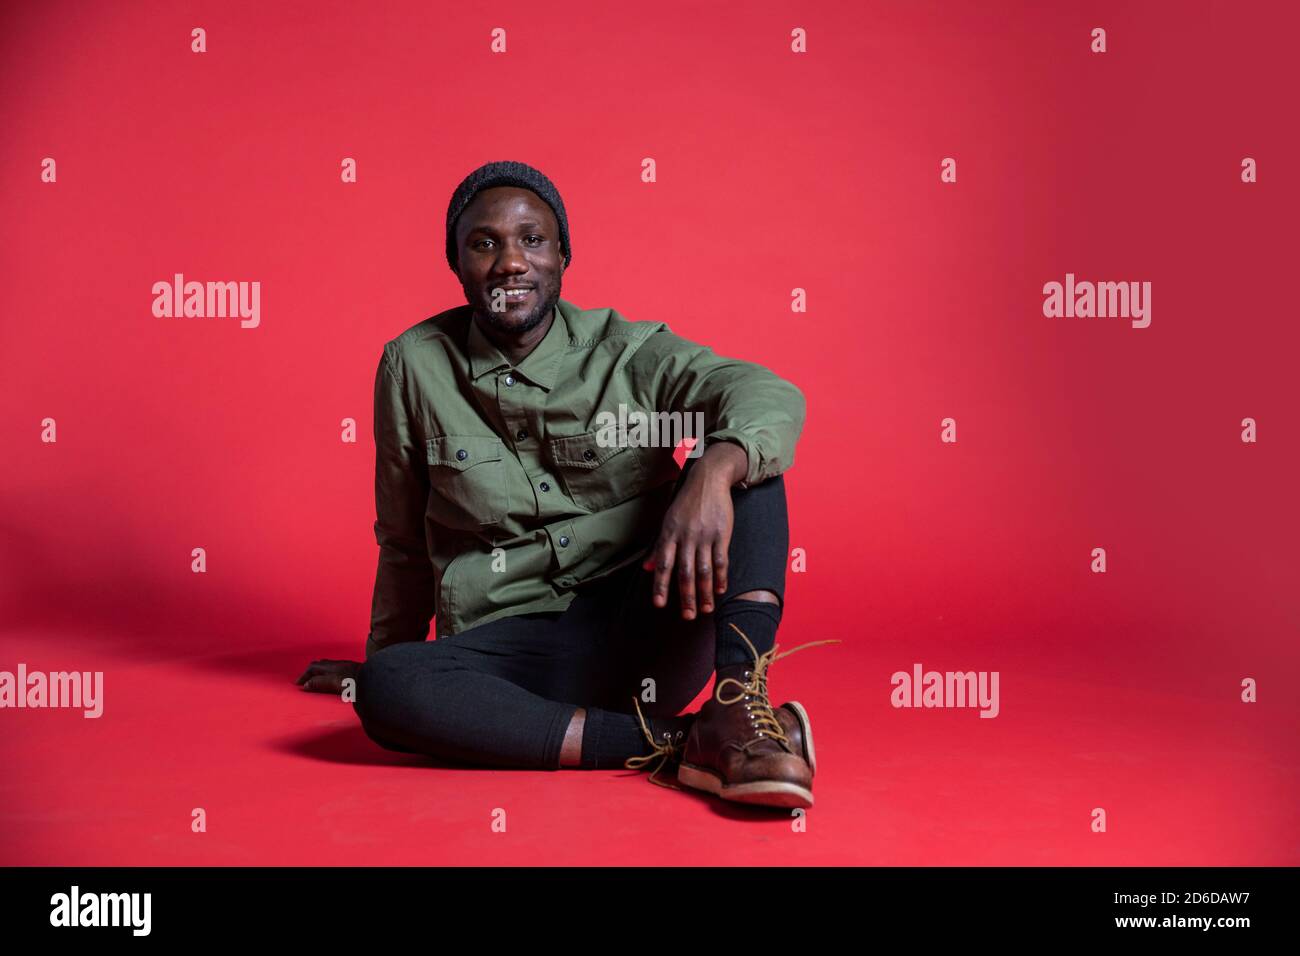 Young black man sitting relaxed on studio floor for photoshoot. Isolated. Copy space. Stock Photo